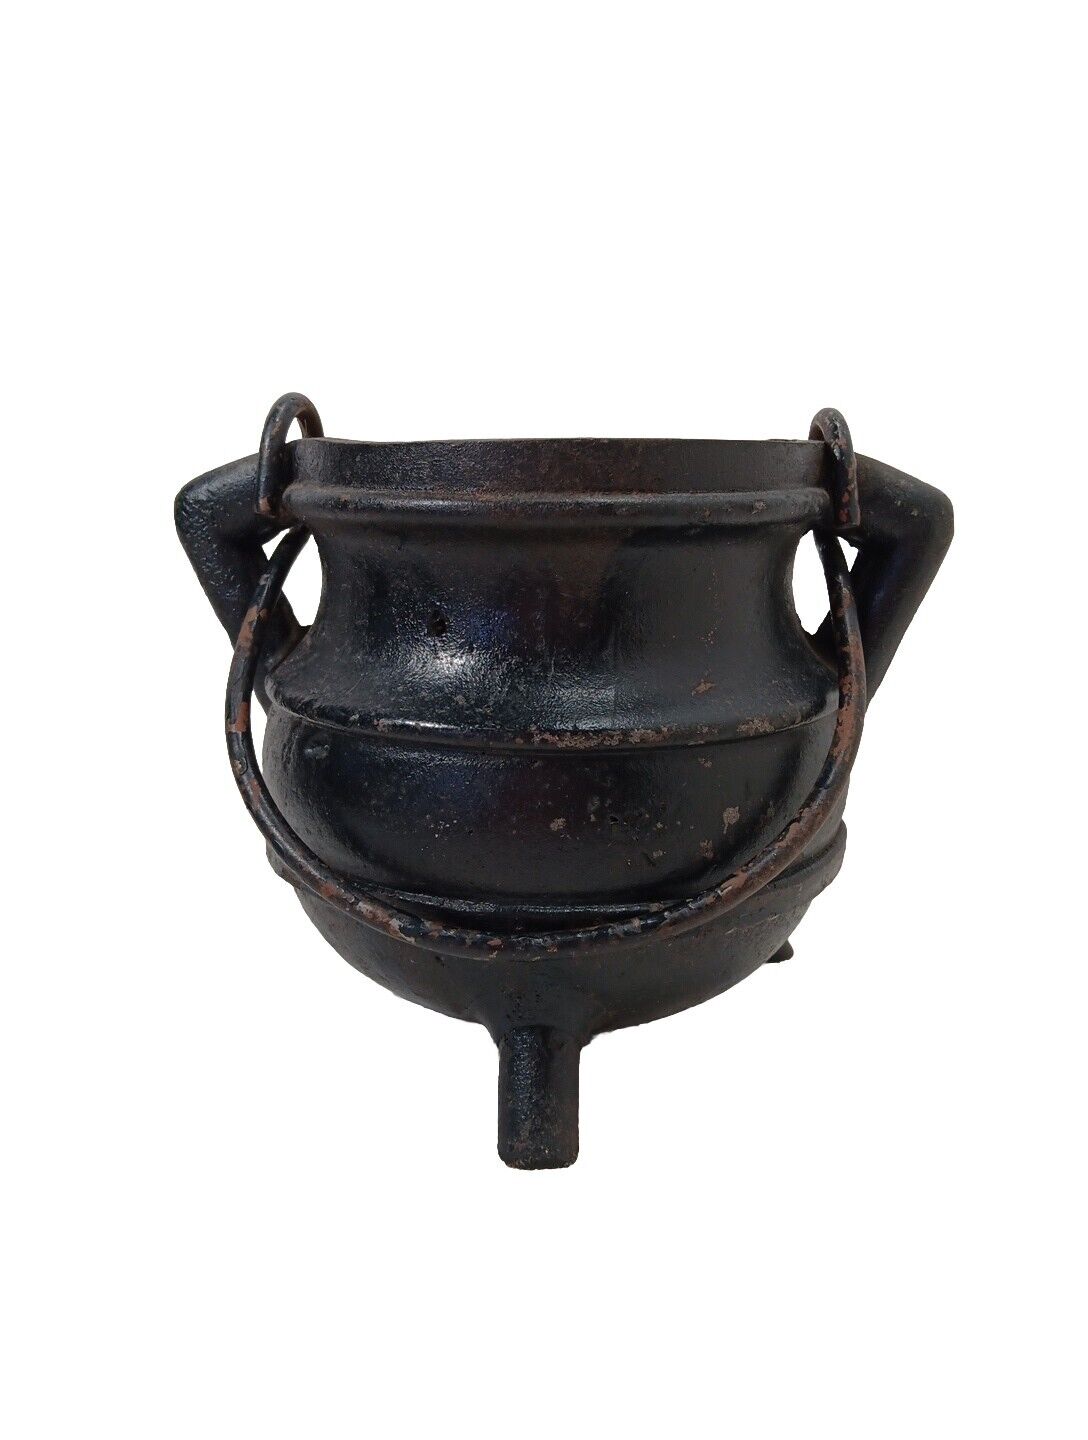 Cast Iron Ash Pot Black Swing Handle Feet 6 inches x 5 inches